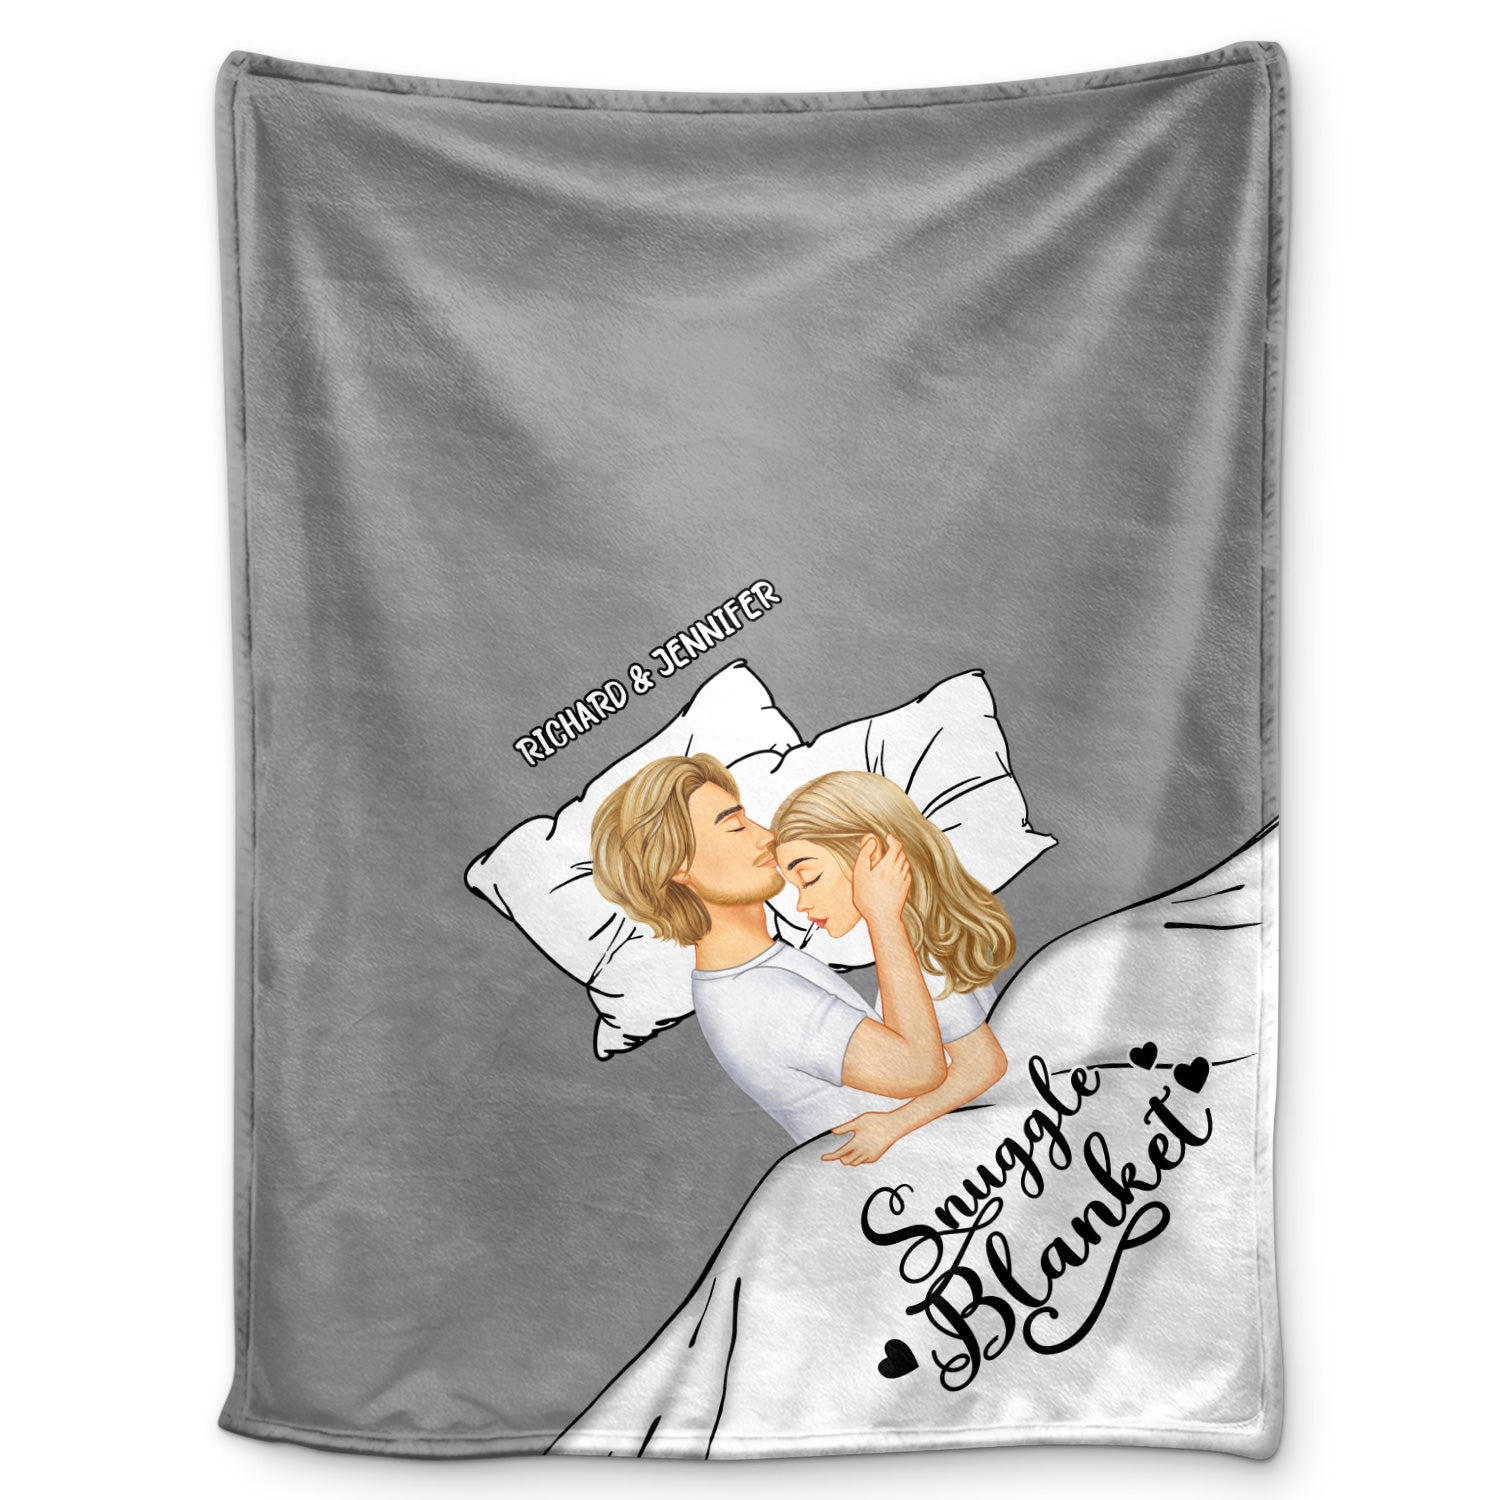 Couple Side View Snuggle Blanket - Gift For Couples - Personalized Fleece Blanket